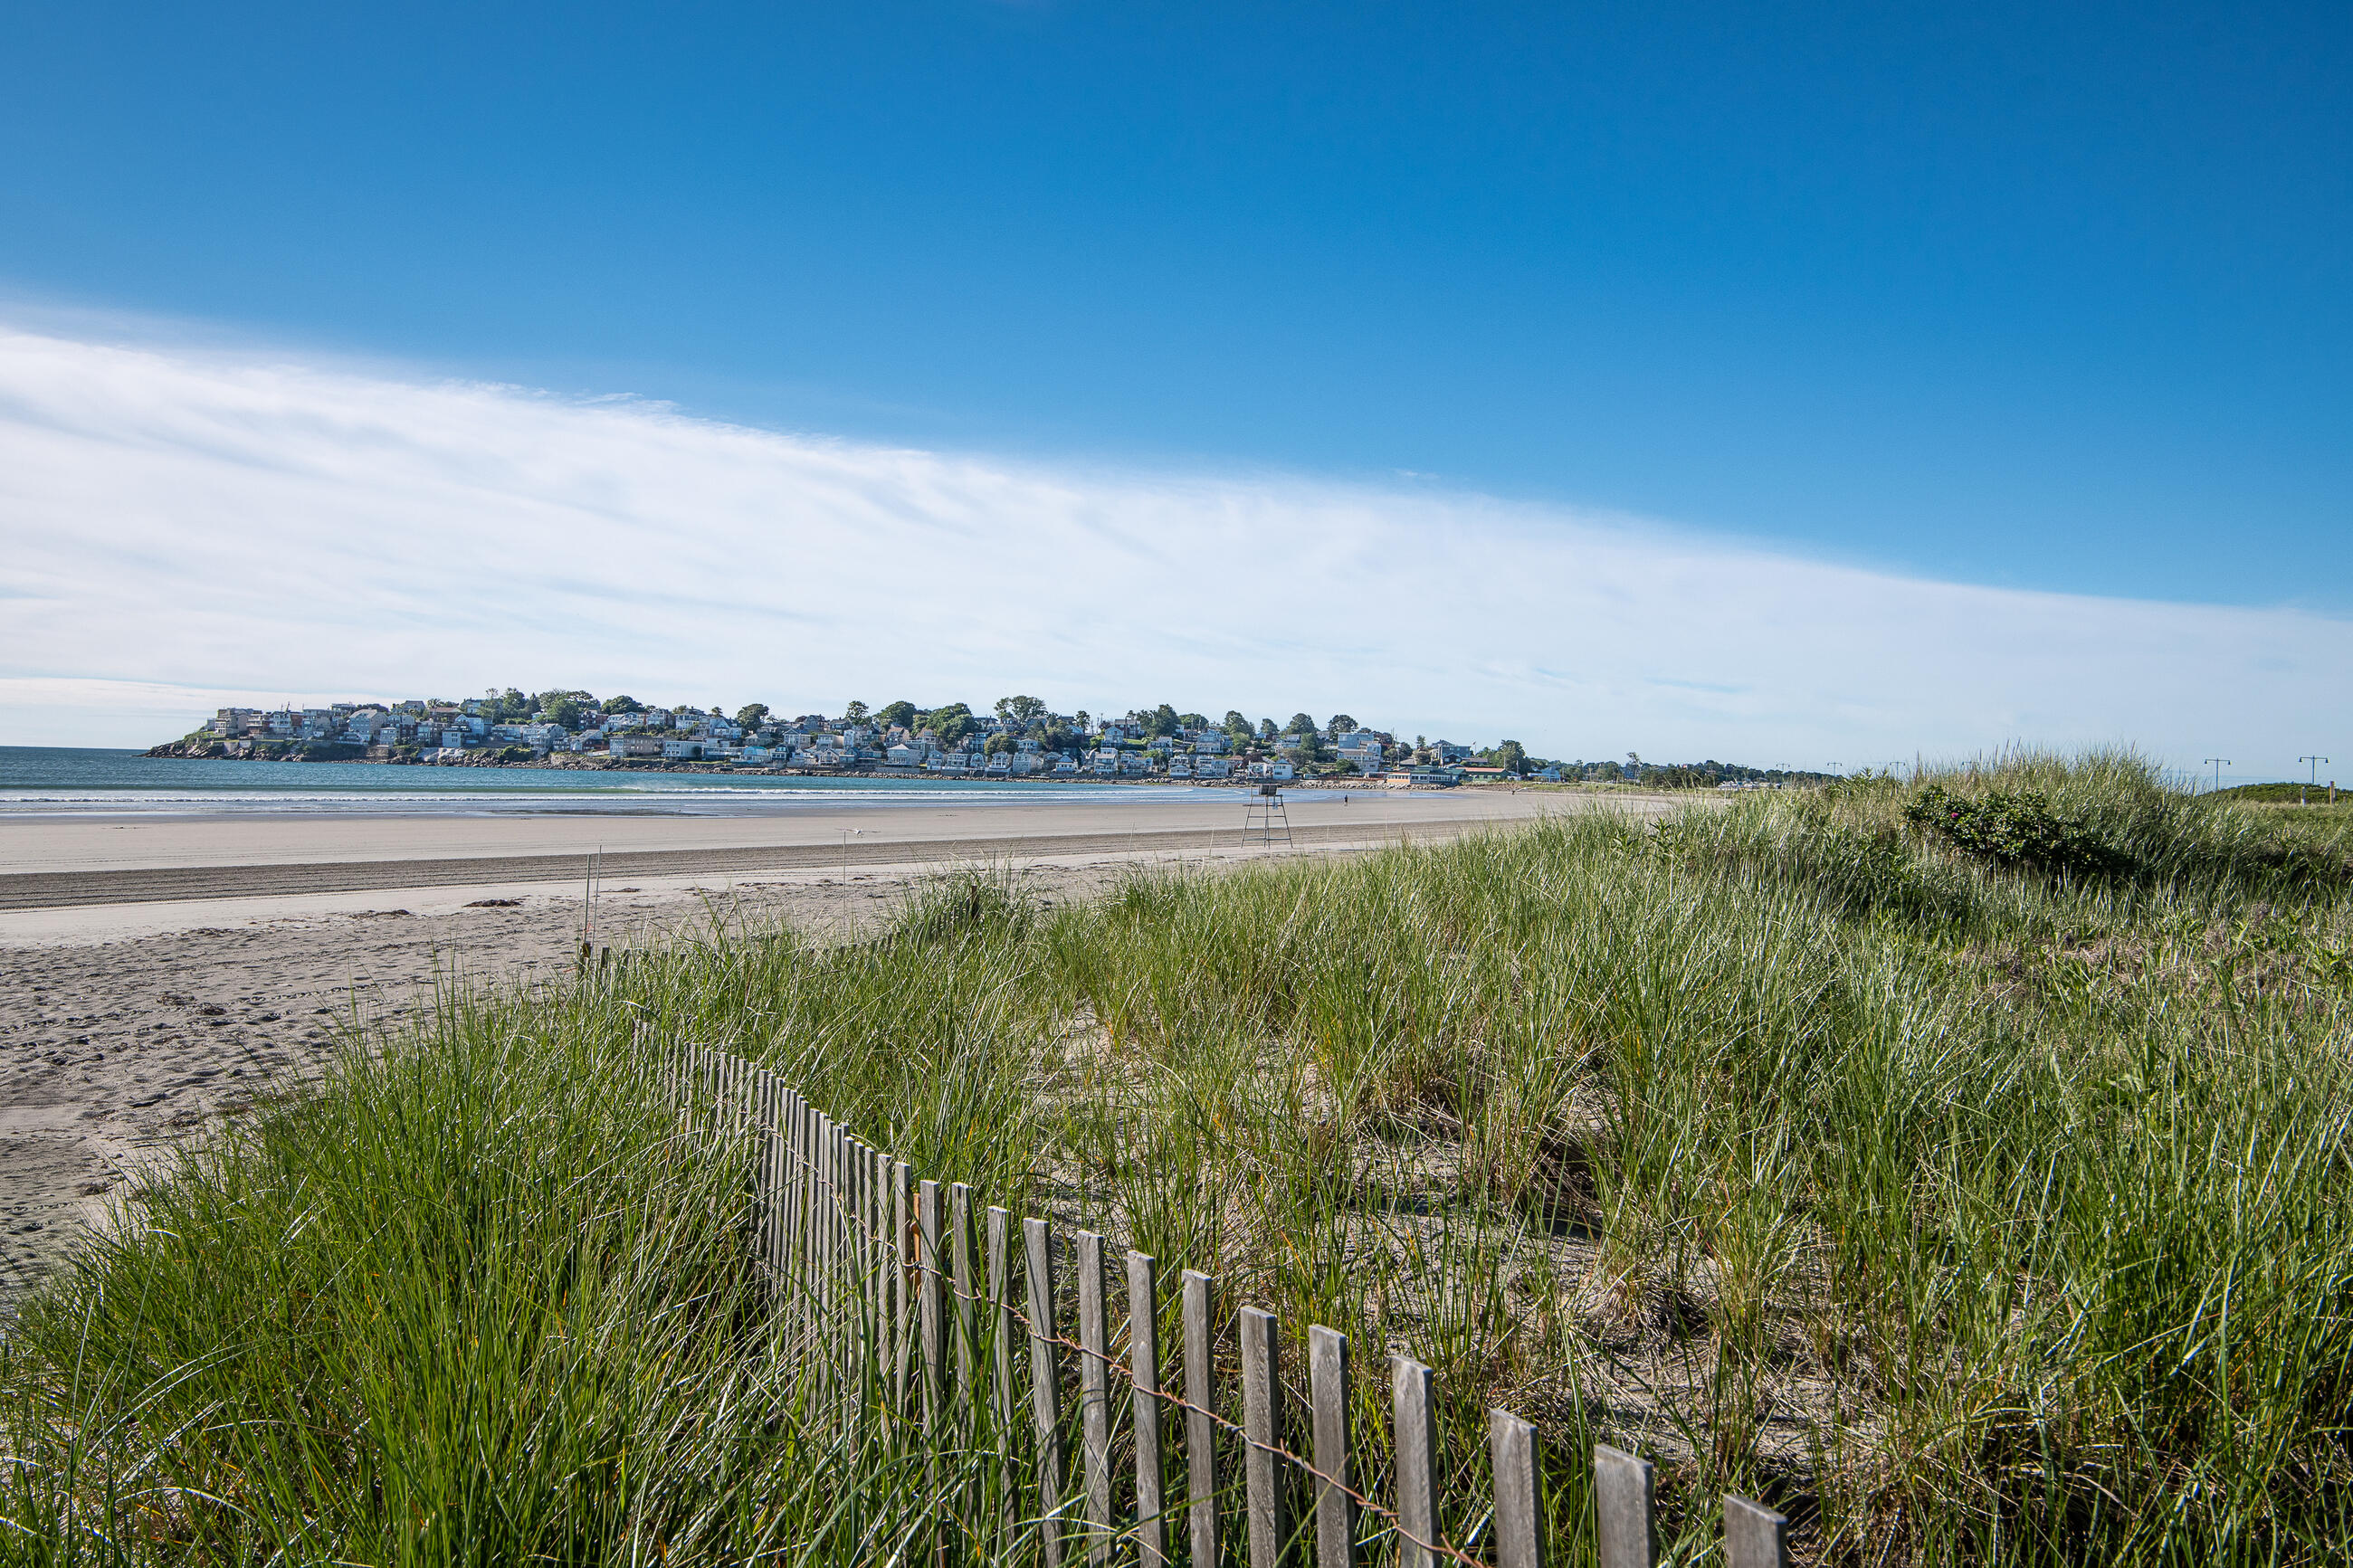 A photo of the Nahant Beach Shoreline. There's a little wooden plank fence in some grass in the foreground, and there are buildings across the water, further down the curve of the beach